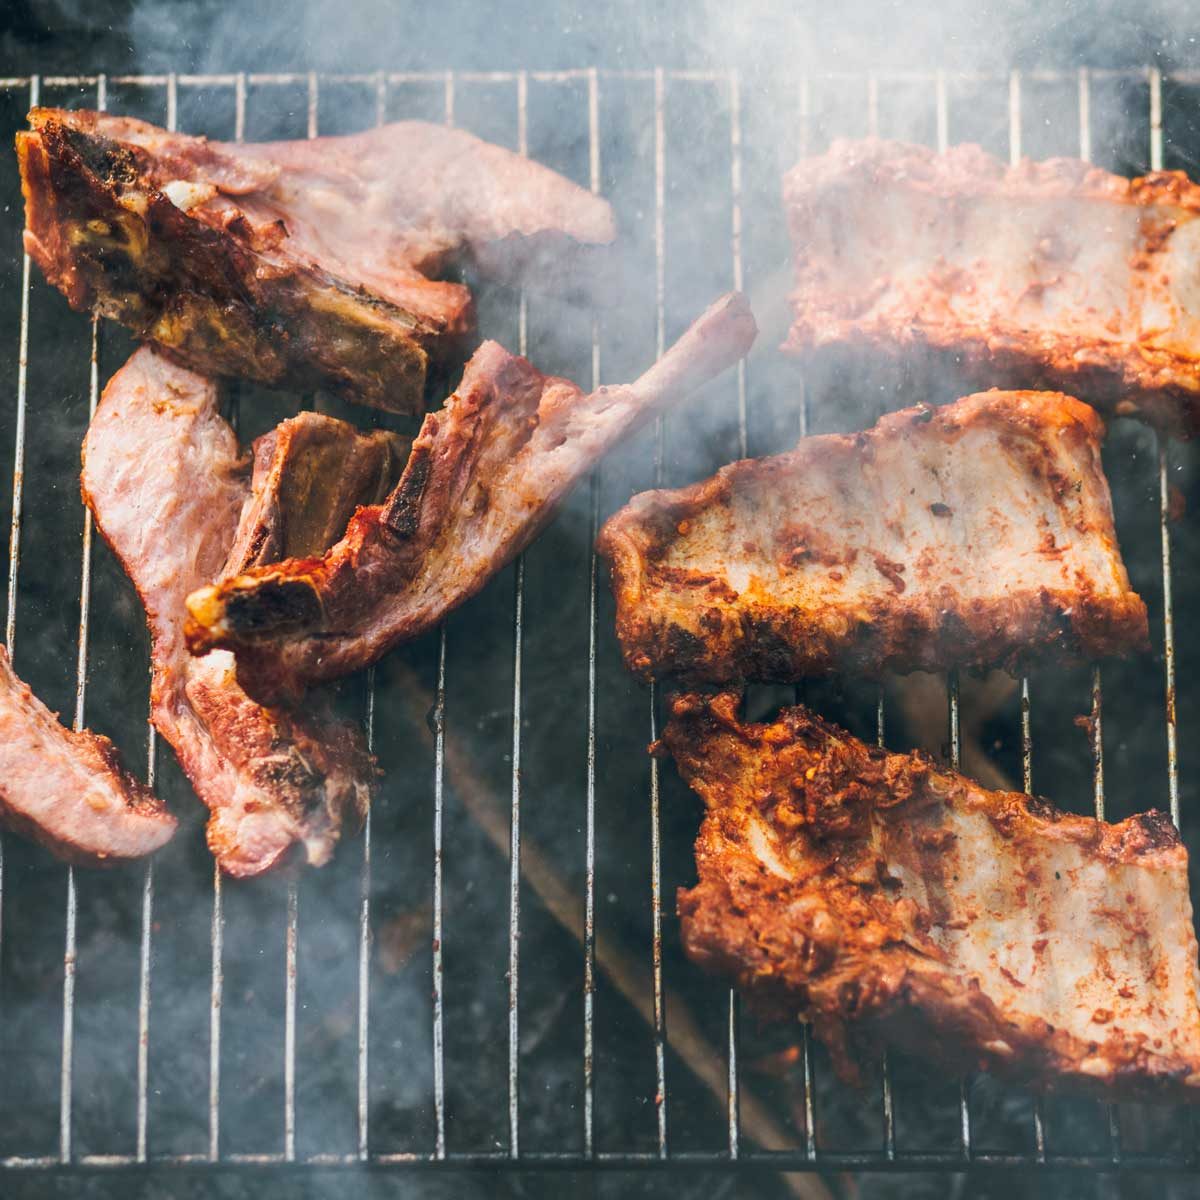 https://www.familyhandyman.com/wp-content/uploads/2020/06/smoked-ribs-GettyImages-840603716.jpg